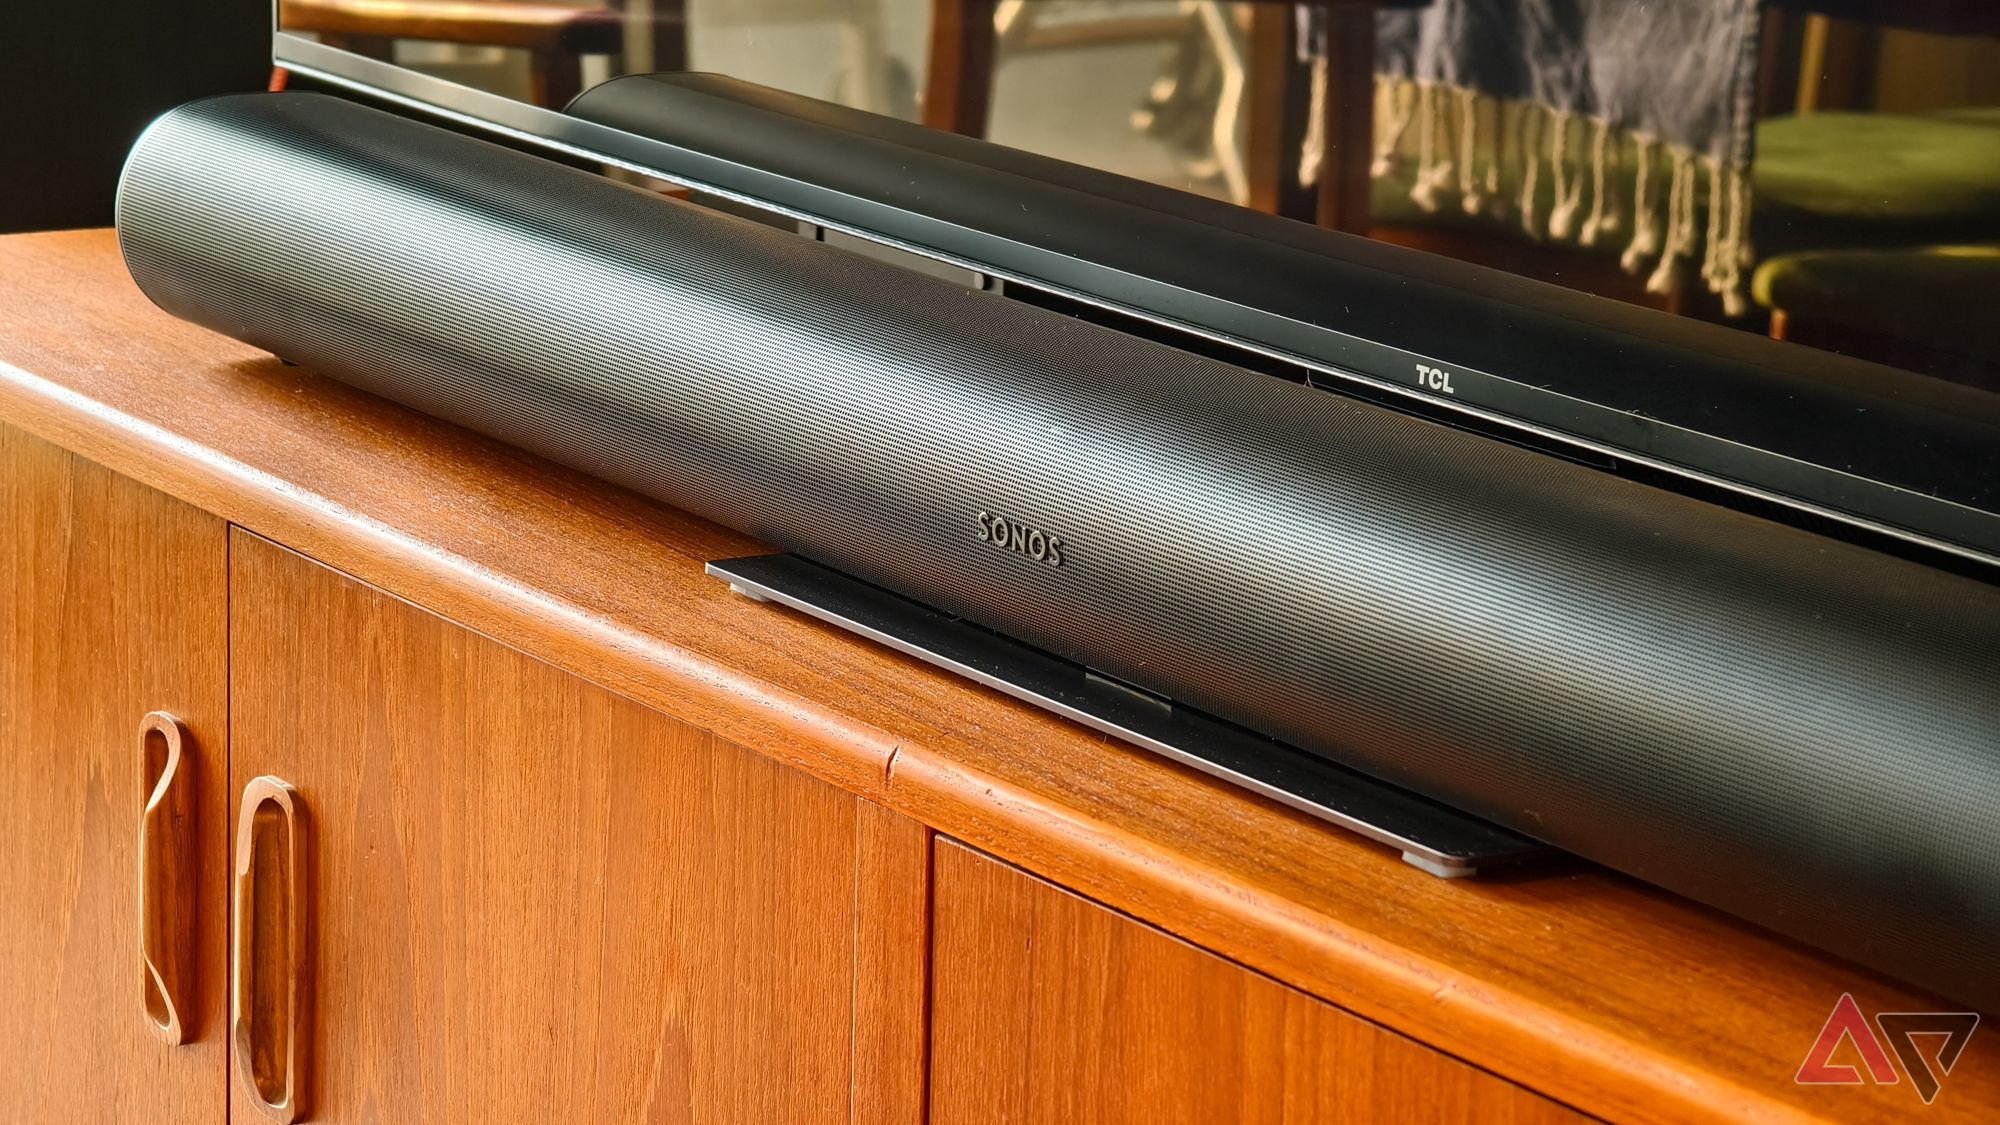 A photo of a black Sonos Arc soundbar on a teak wood TV stand, below a TCL TV, with the tassels of a blanket visible reflected in the TV